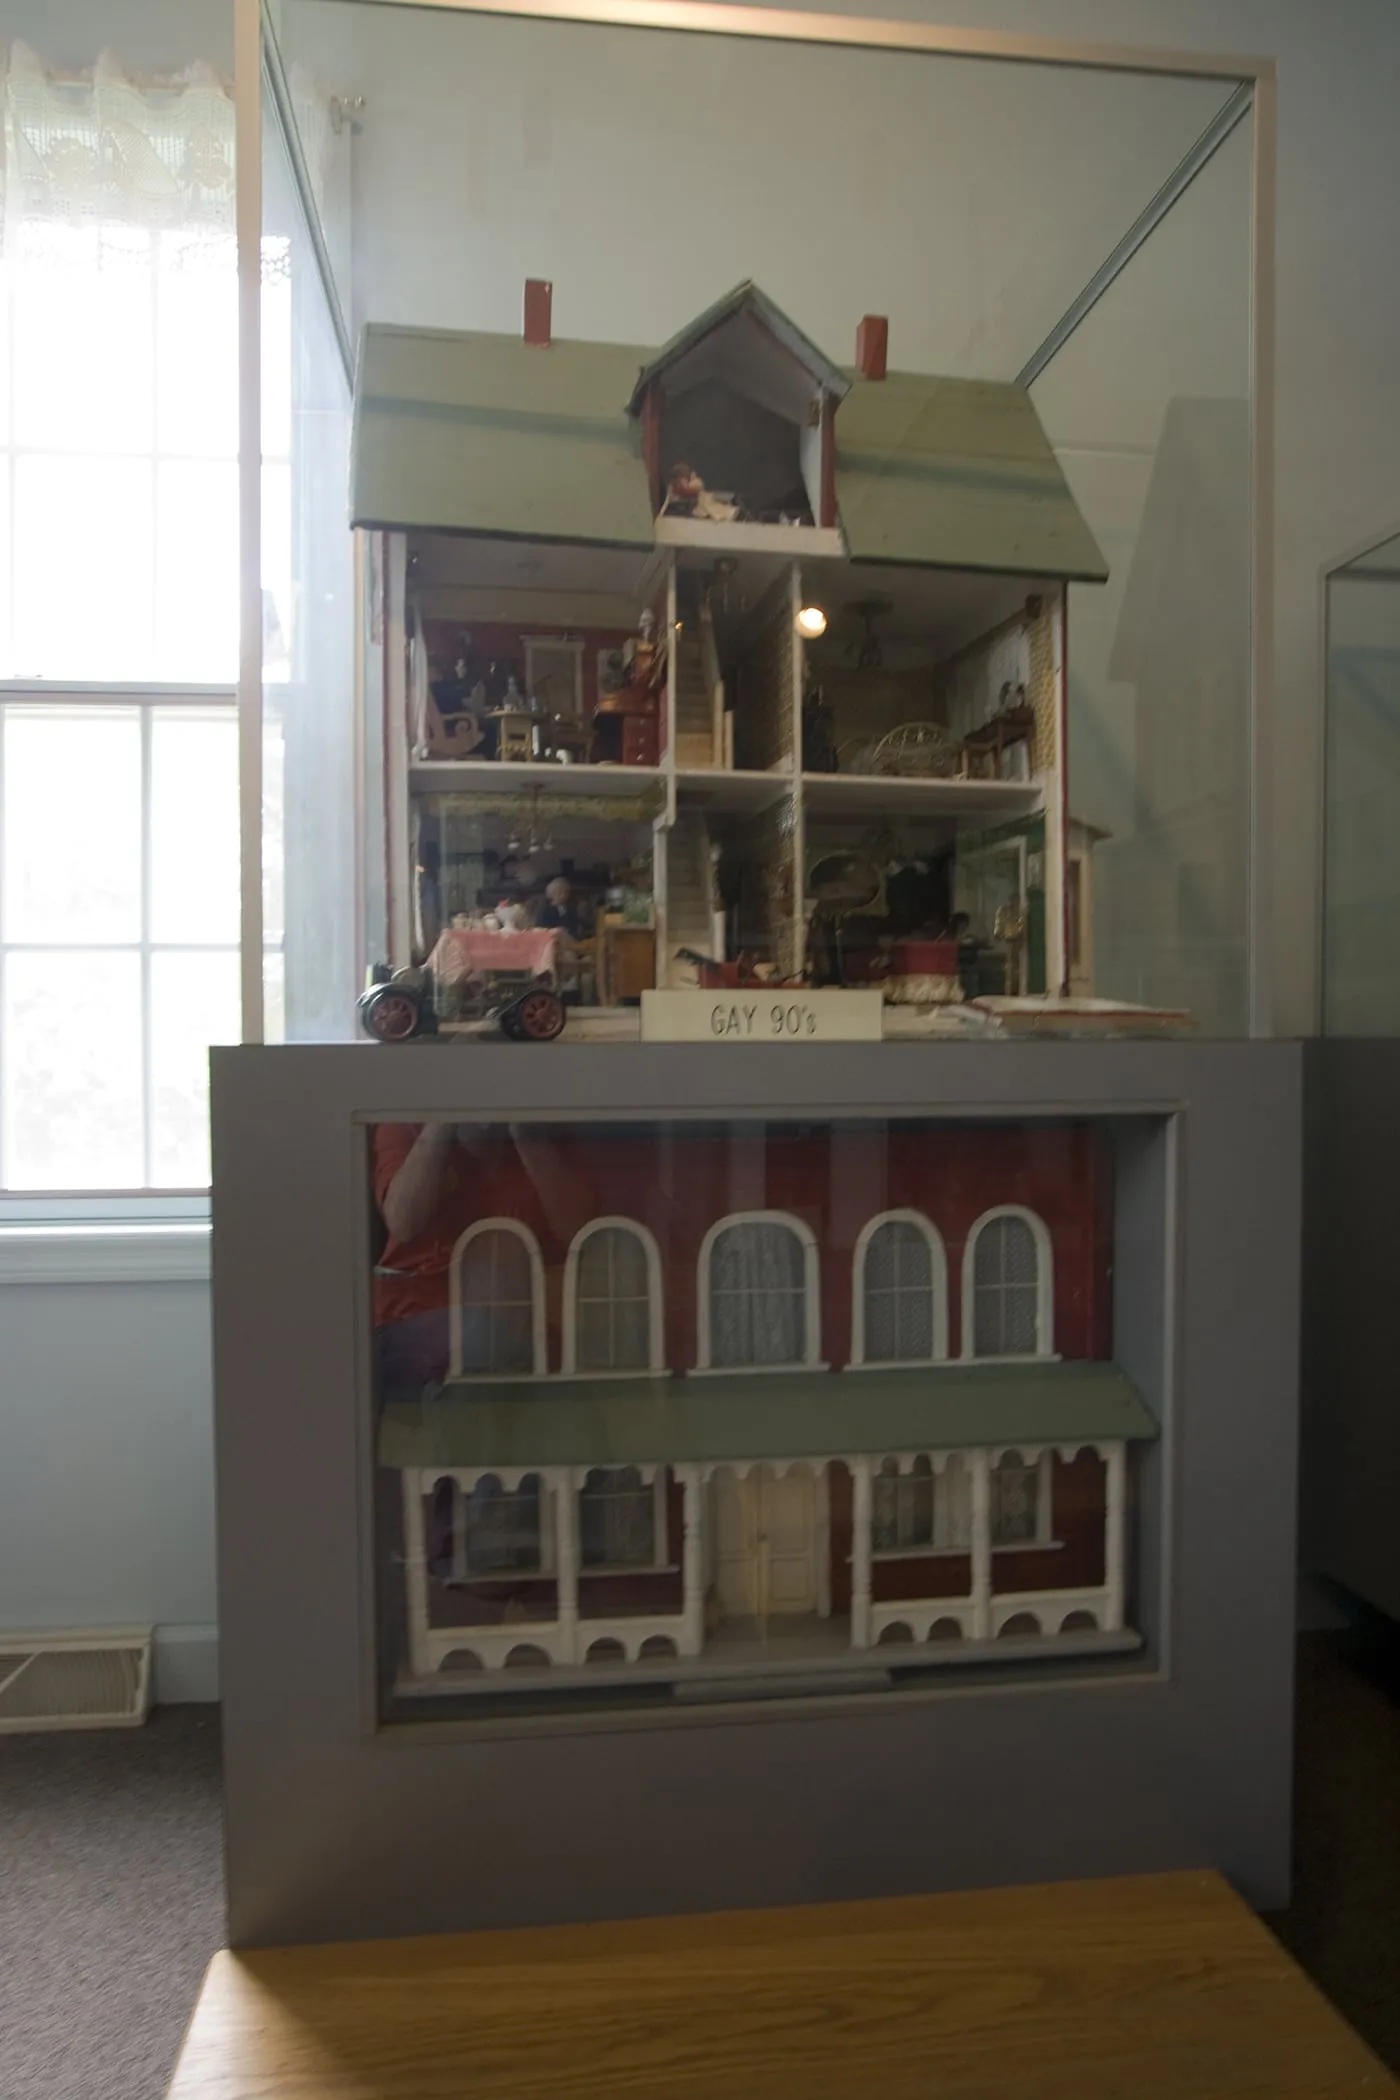 The Old Dolls' House at Midway Village in Rockford, Illinois